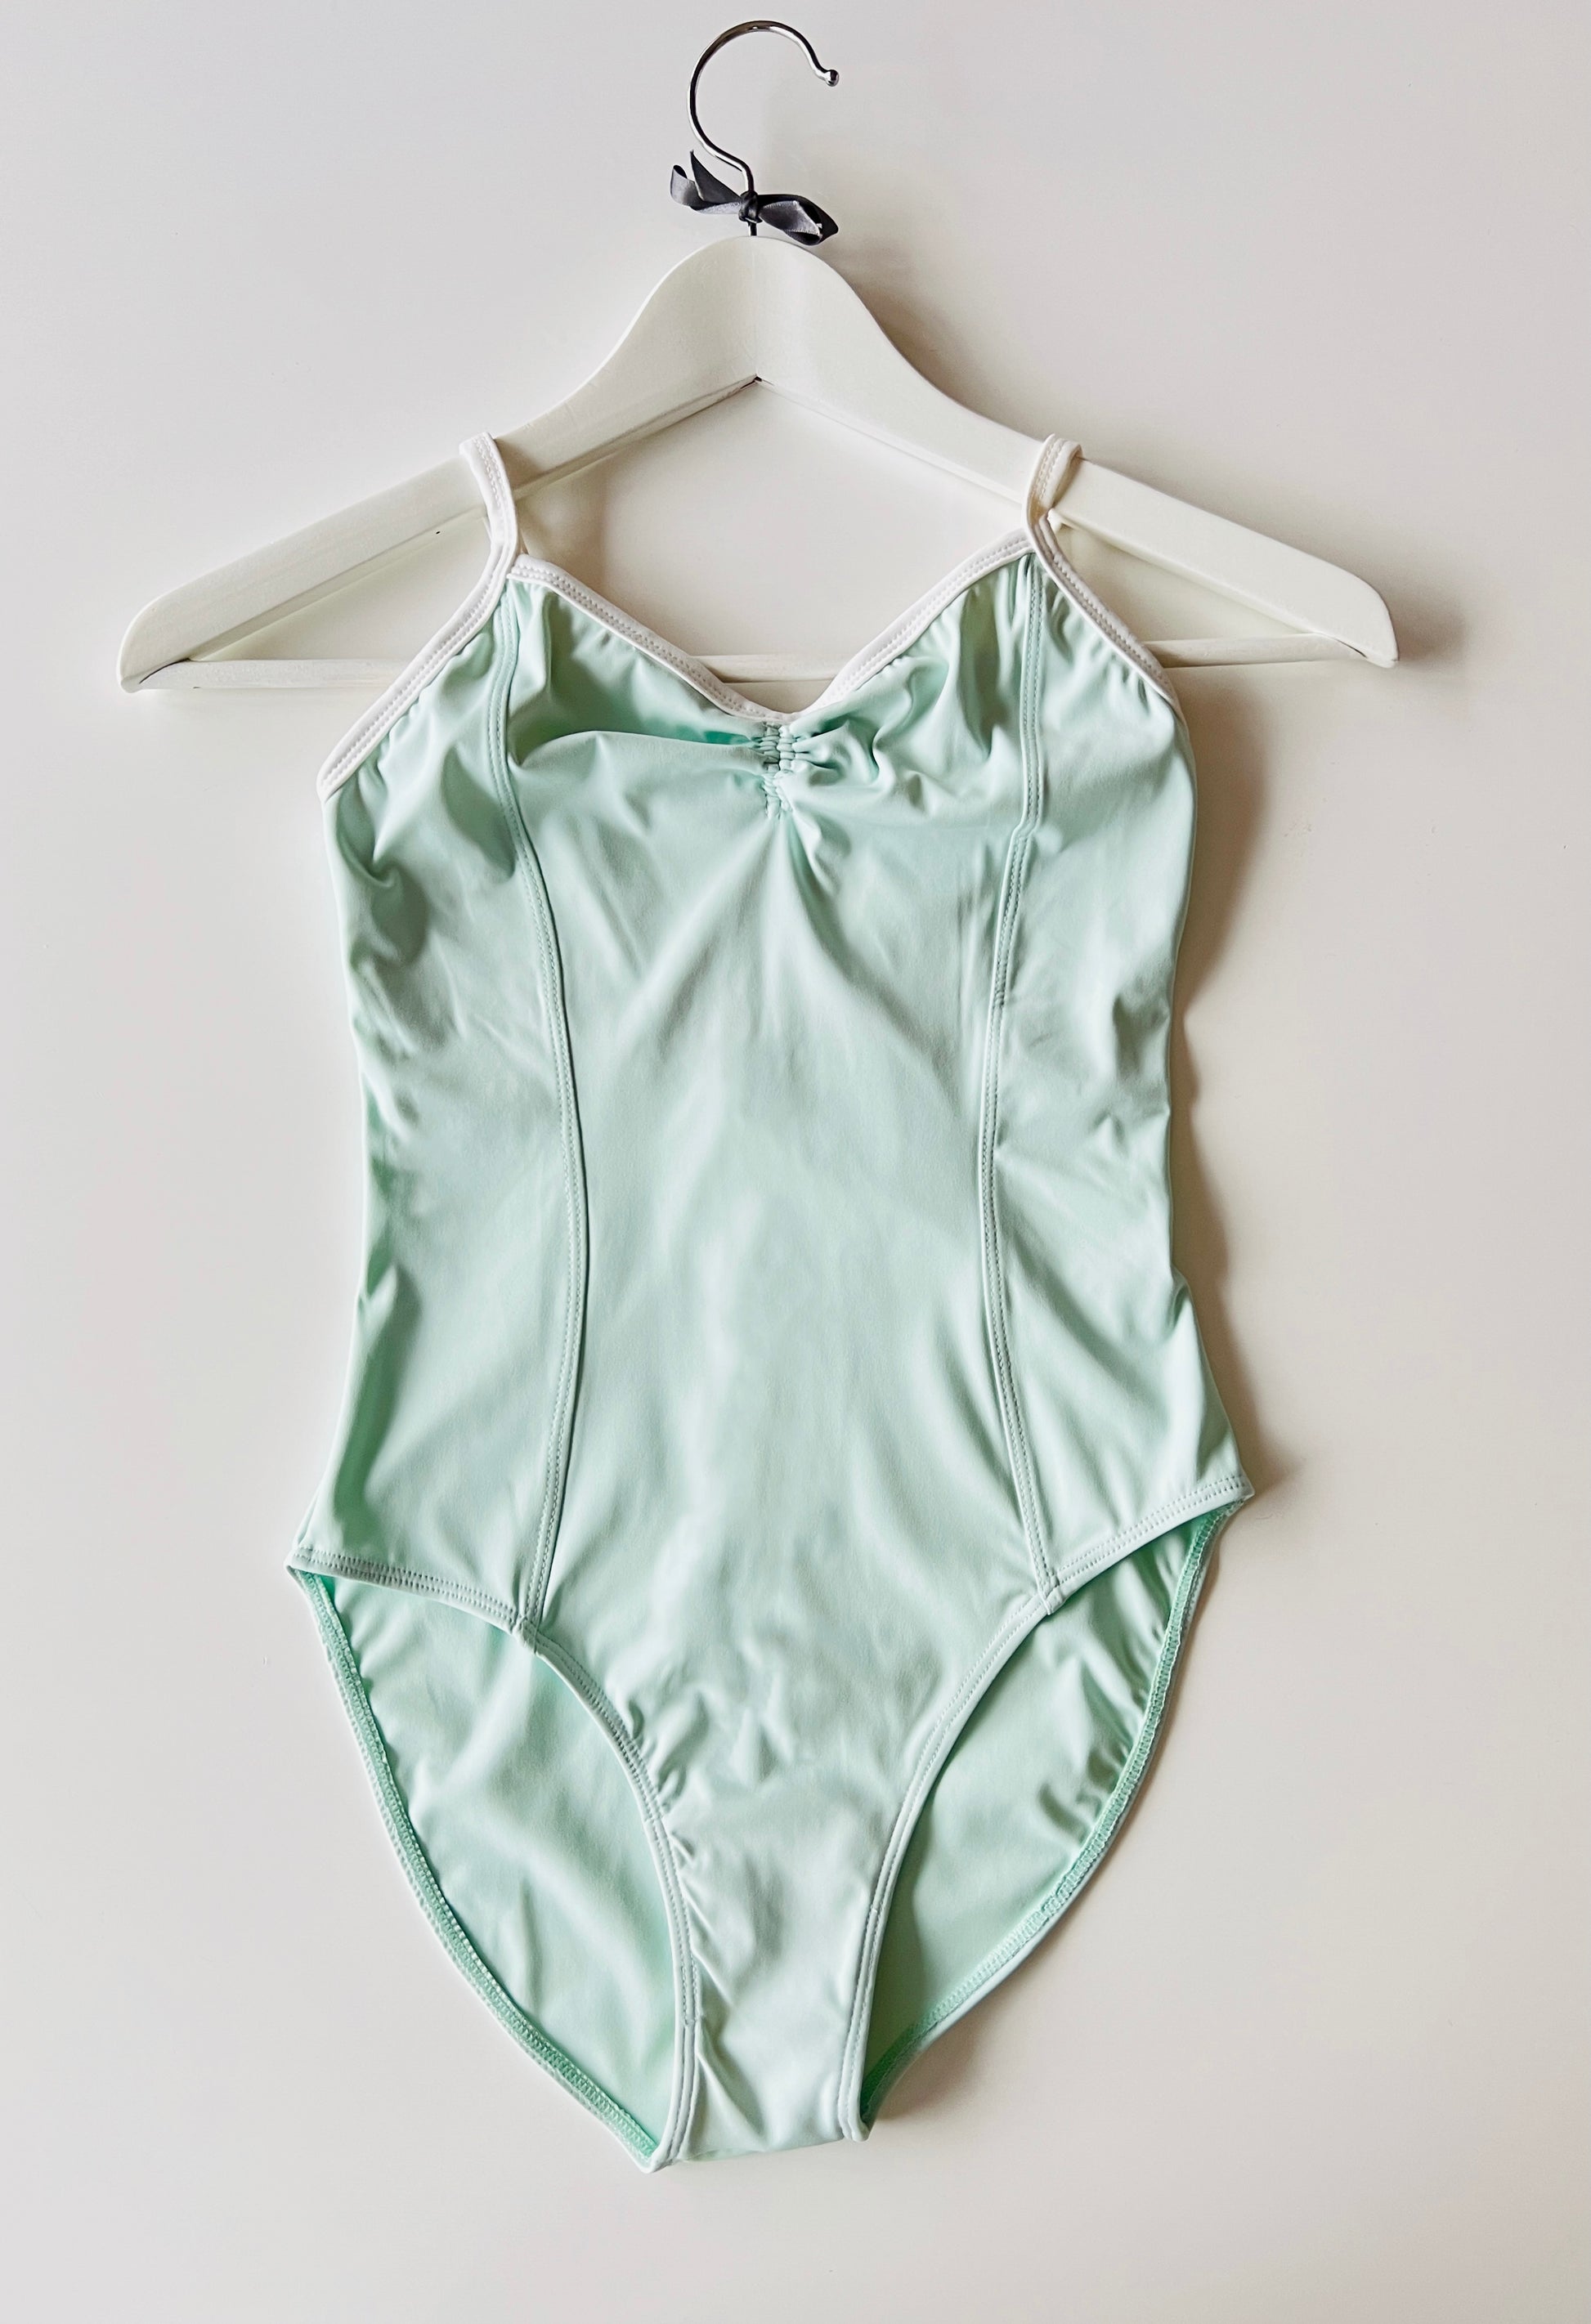 Camisole ballet leotard in mint green and white from The Collective Dancewear 